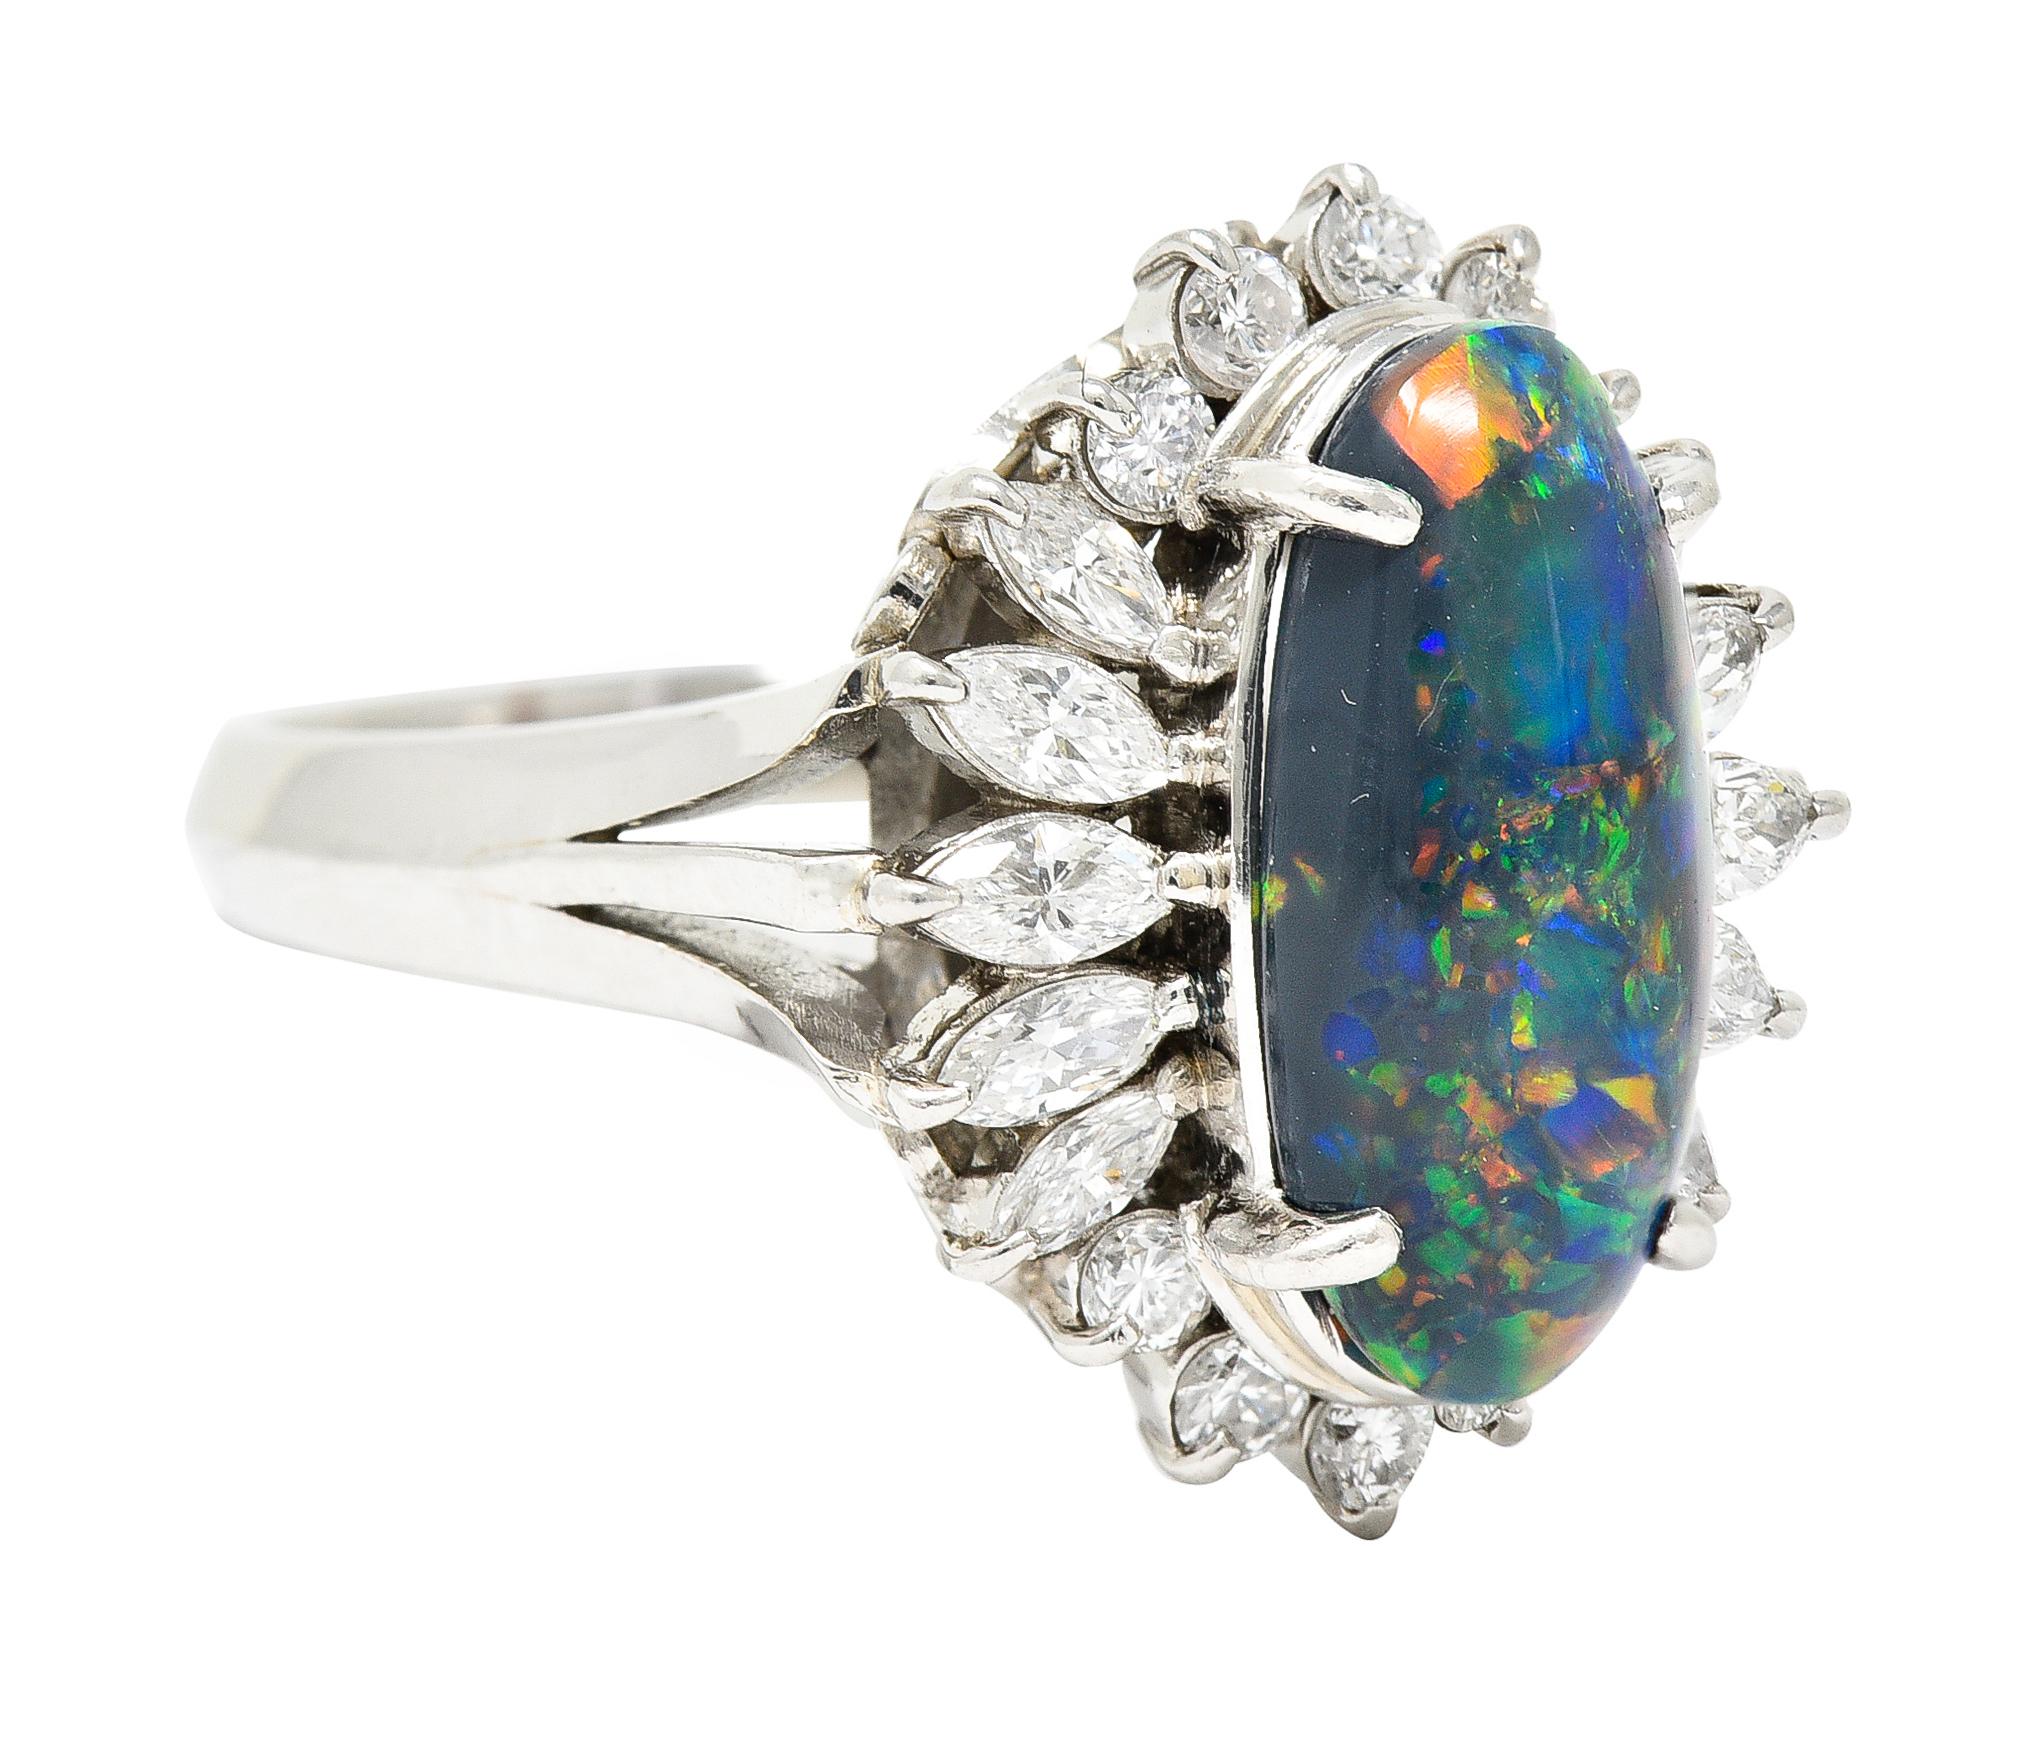 Centering an oval shaped black opal cabochon measuring 6.5 x 13.5 mm. Semi-translucent black in body color with spectral play-of-color. Prong set with a halo surround of marquise cut diamonds. With additional round brilliant cut diamonds - all prong